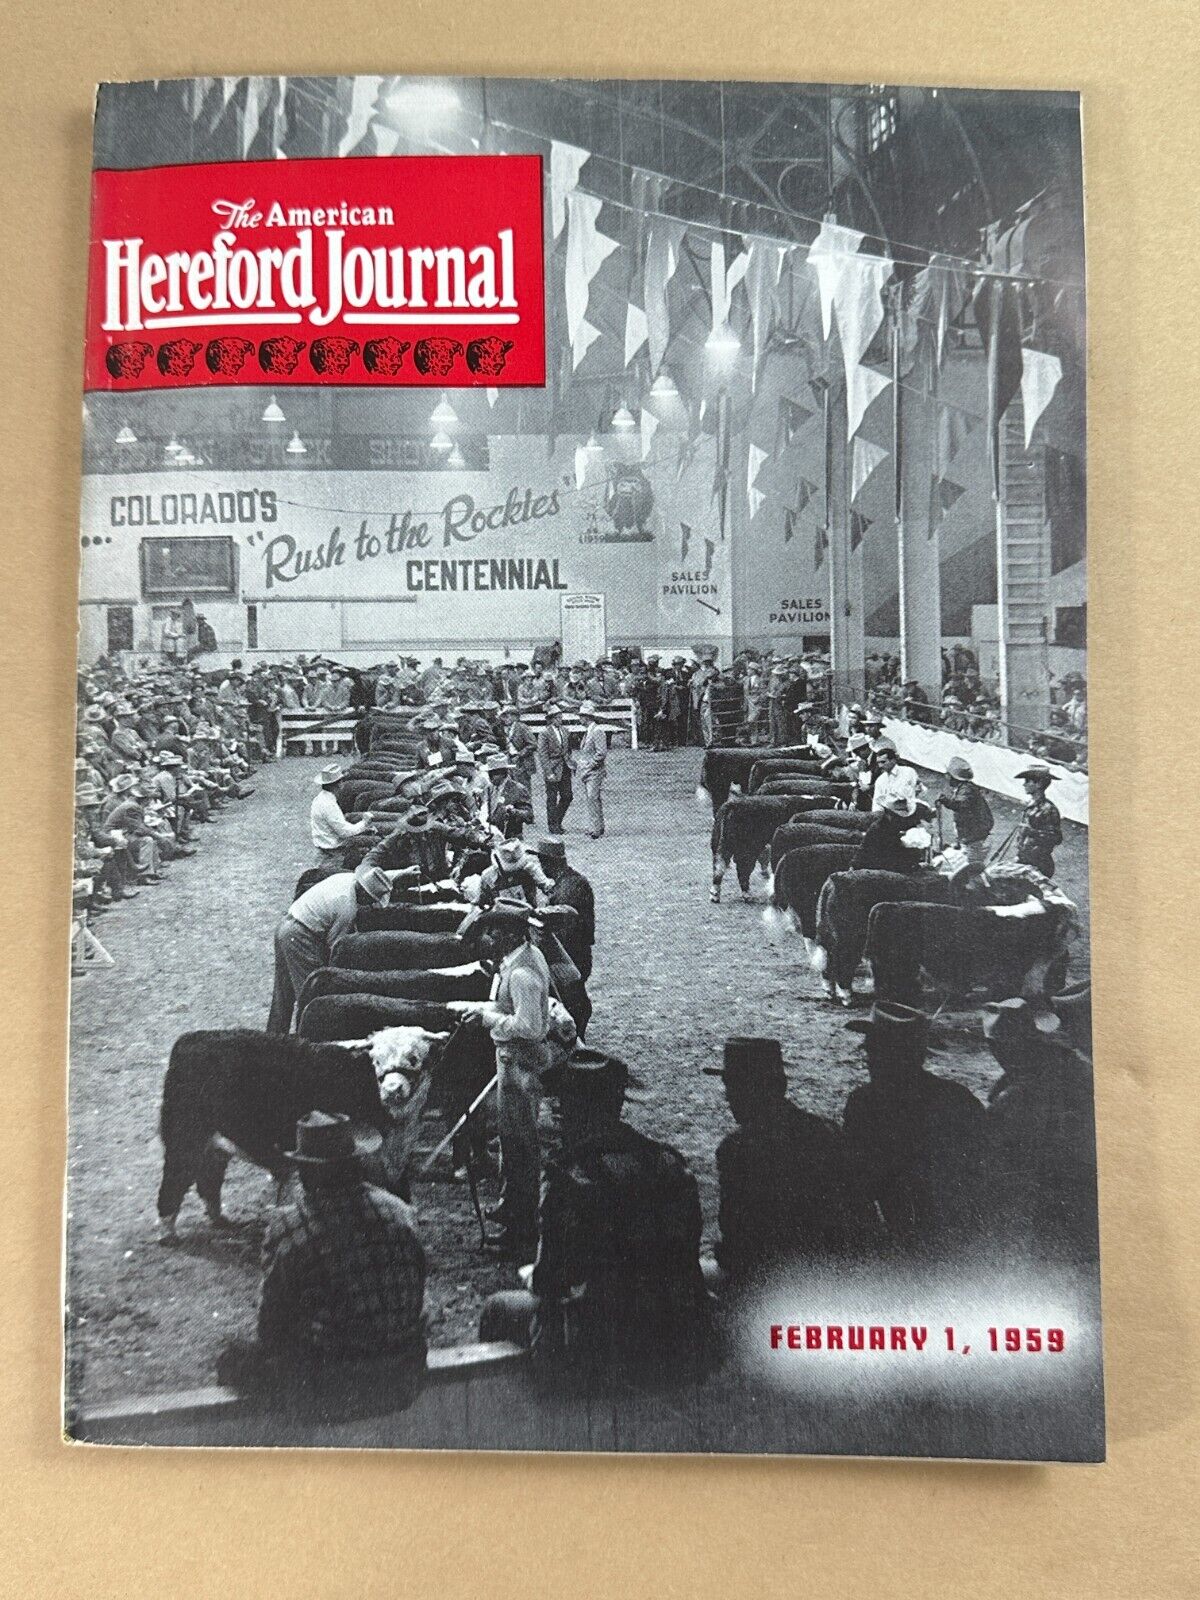 February 1, 1959 American Hereford Journal magazine - ads, photos, articles, etc